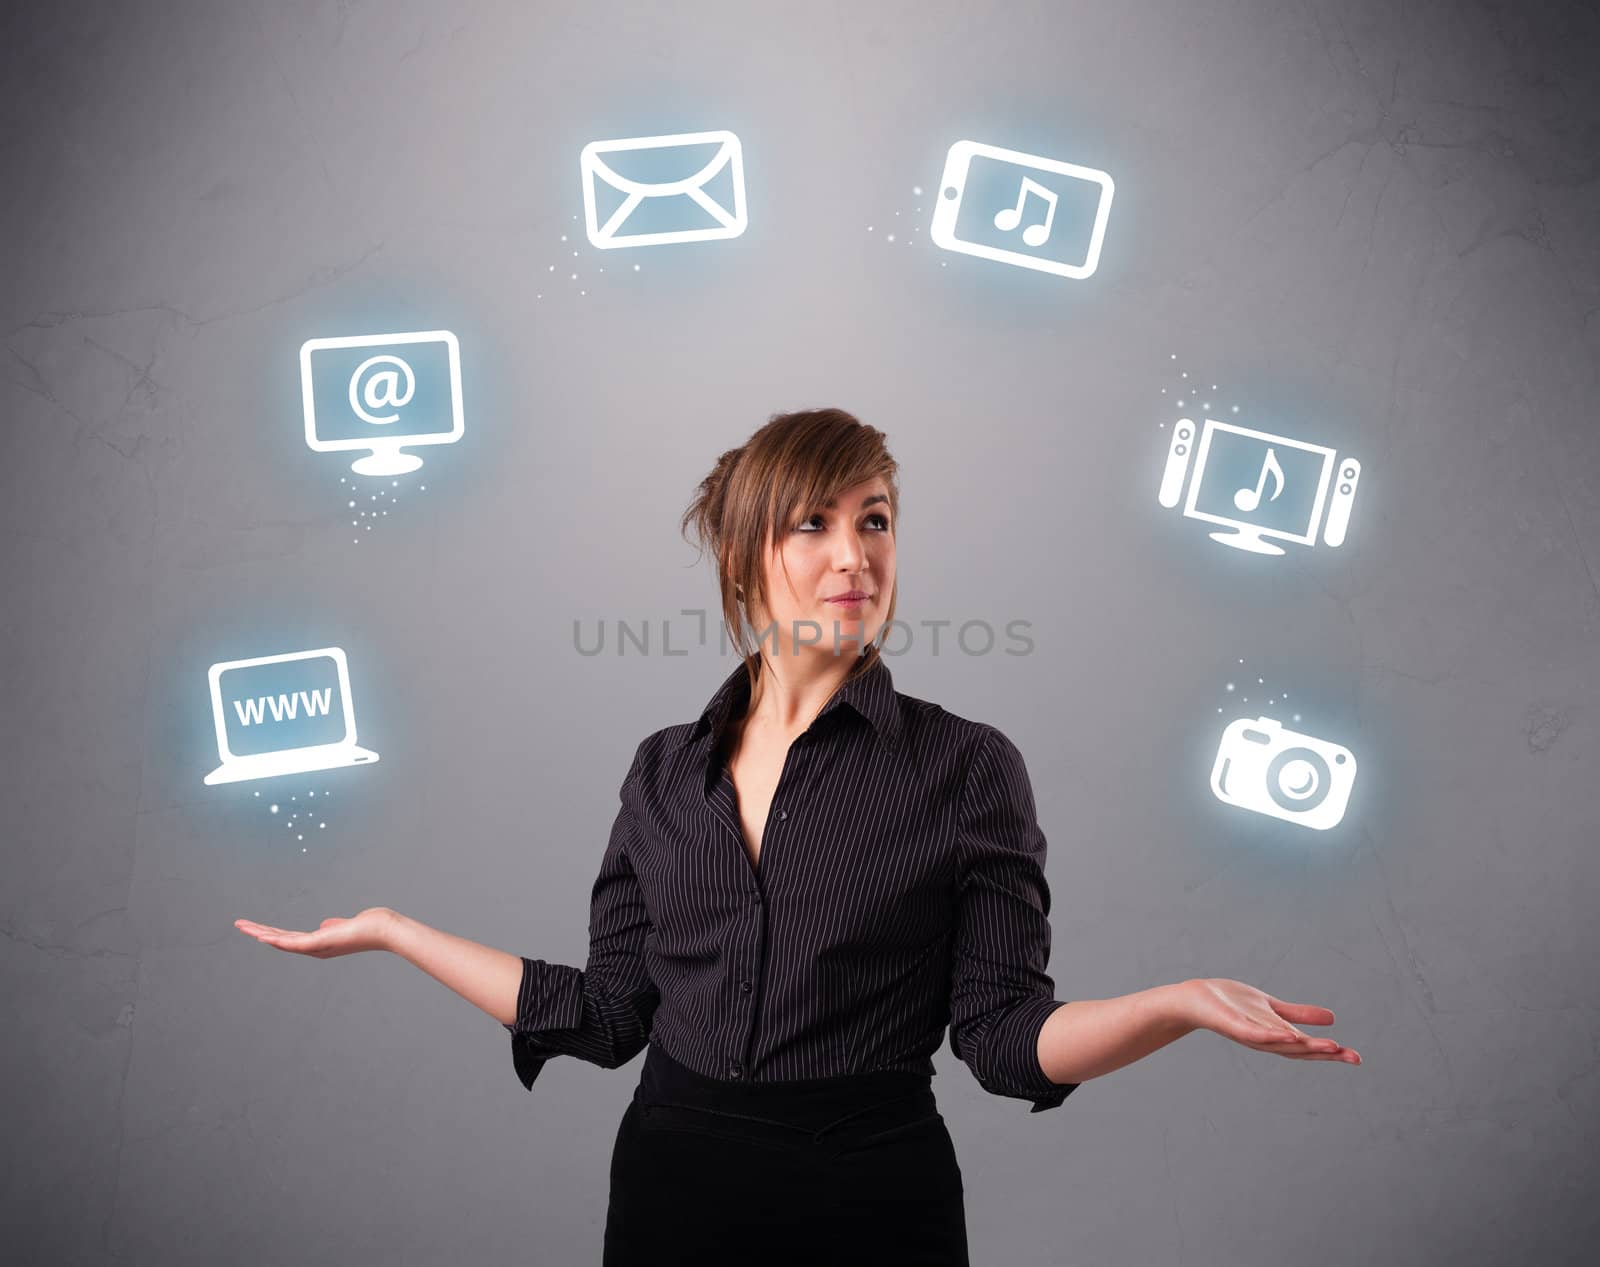 pretty girl standing and juggling with elecrtonic devices icons